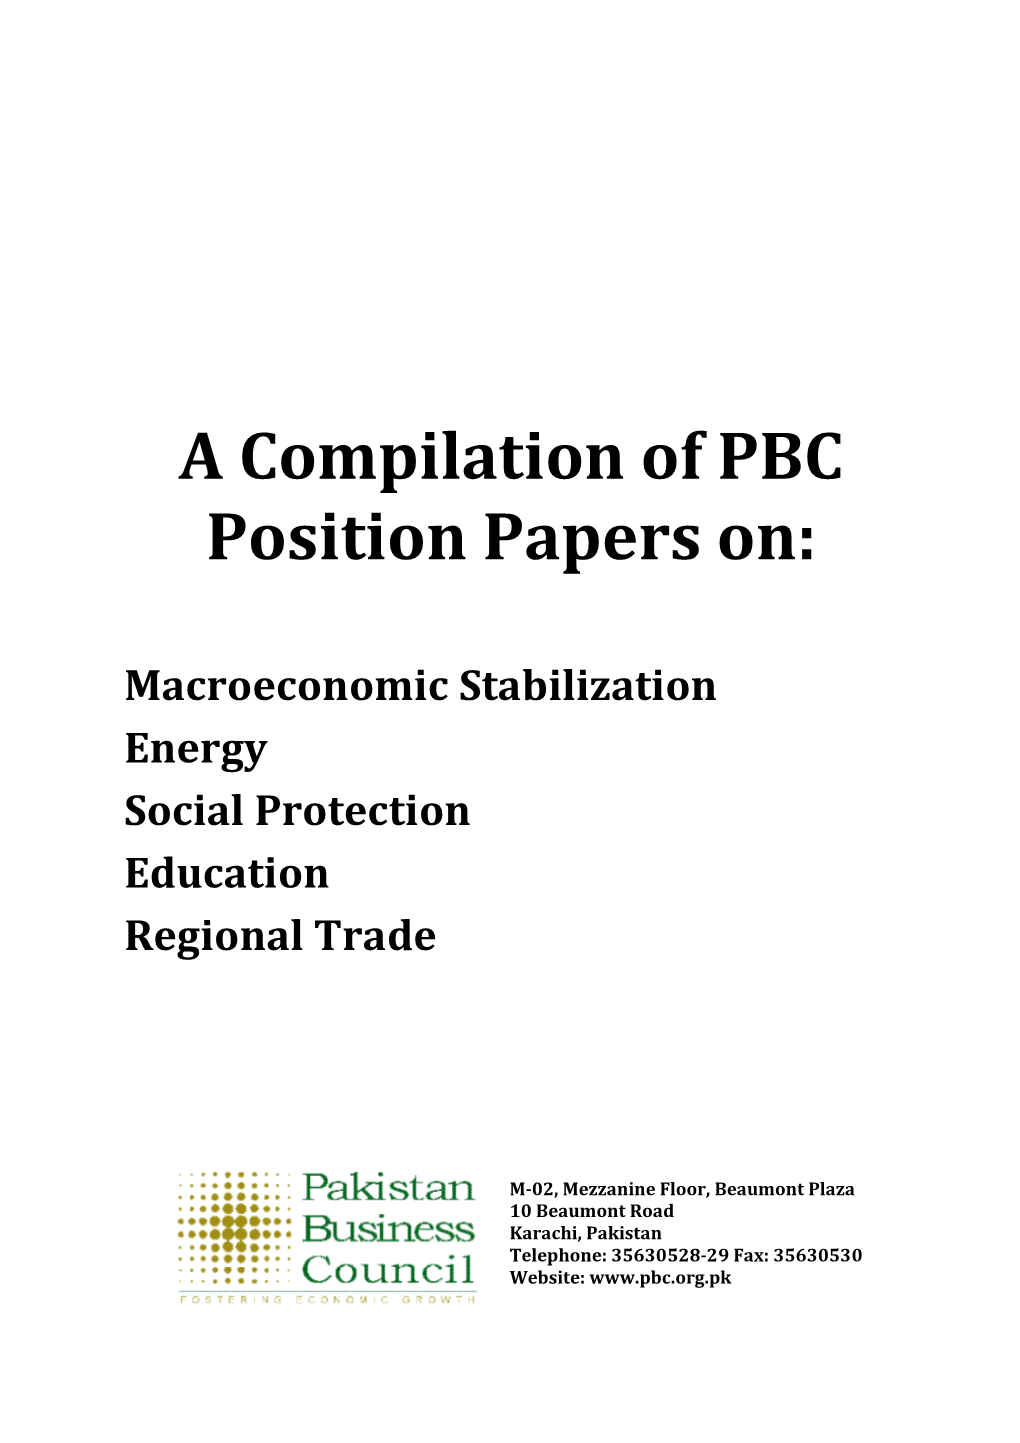 A Compilation of PBC Position Papers On